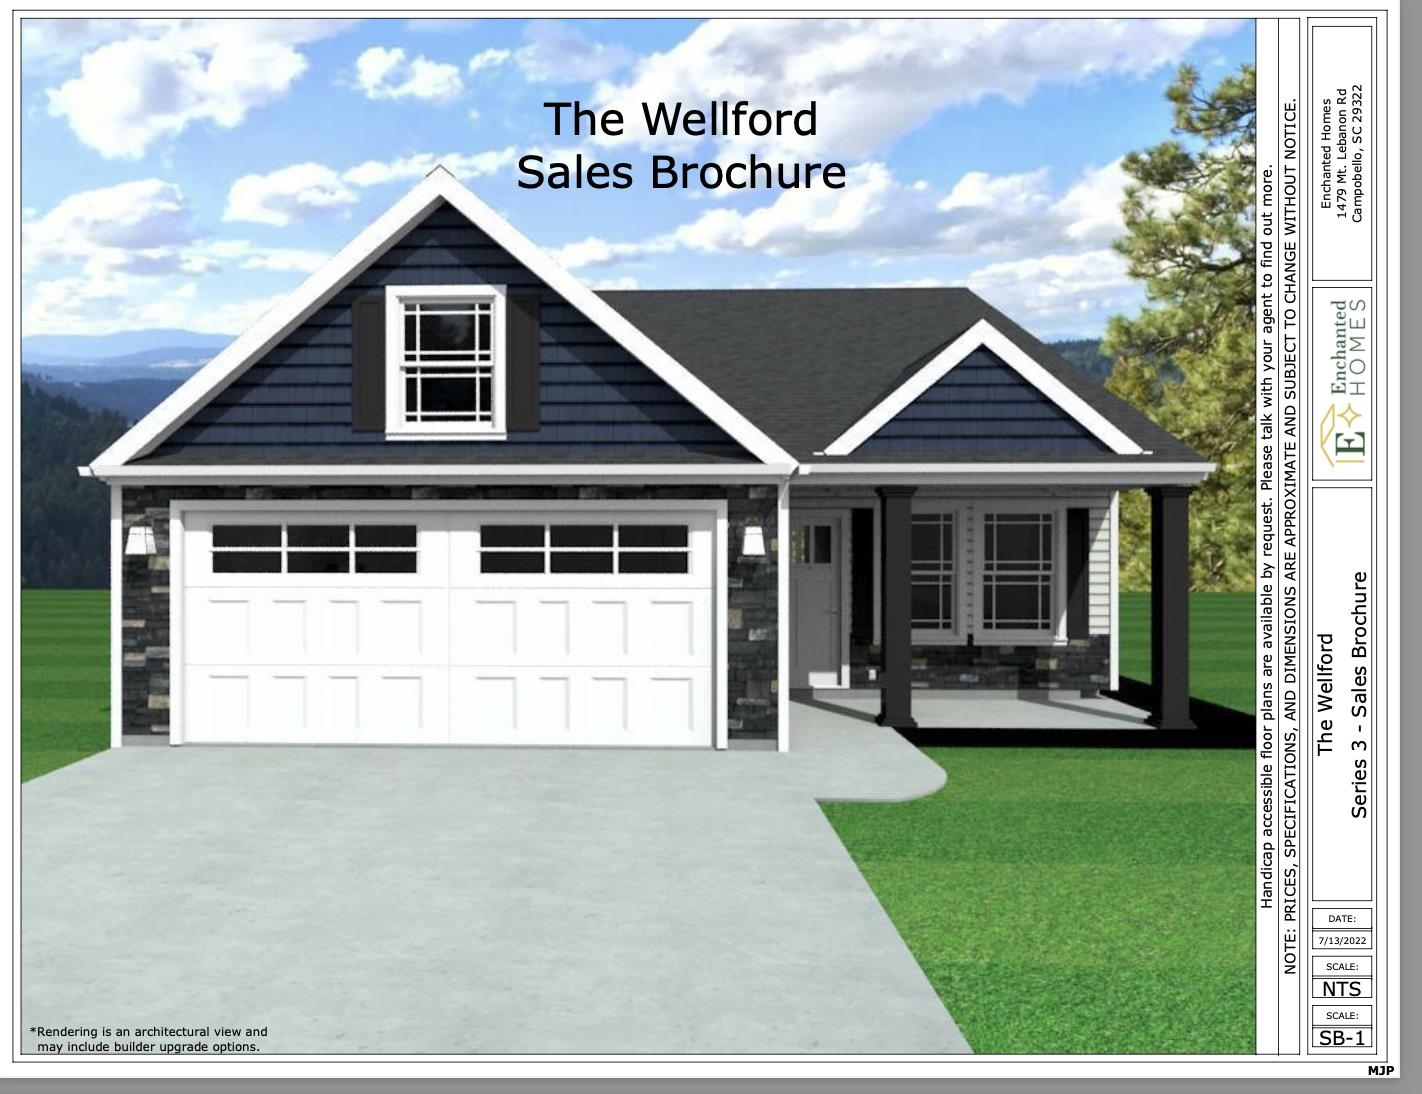 The WELLFORD (Lot 7) offers a modern, open concept living area perfect for entertaining.  3 bedroom, 2 bath. Complete with the trademark chair rail, crown molding, and rope lighting.  12' x 12' covered back patio and 10' x 12' uncovered concrete patio overlooking.  30-year architectural shingles, site-built construction, and a 10 year limited warranty are included to give you peace of mind. Closing cost or upgrades incentives available when working with a preferred lender and attorney!!